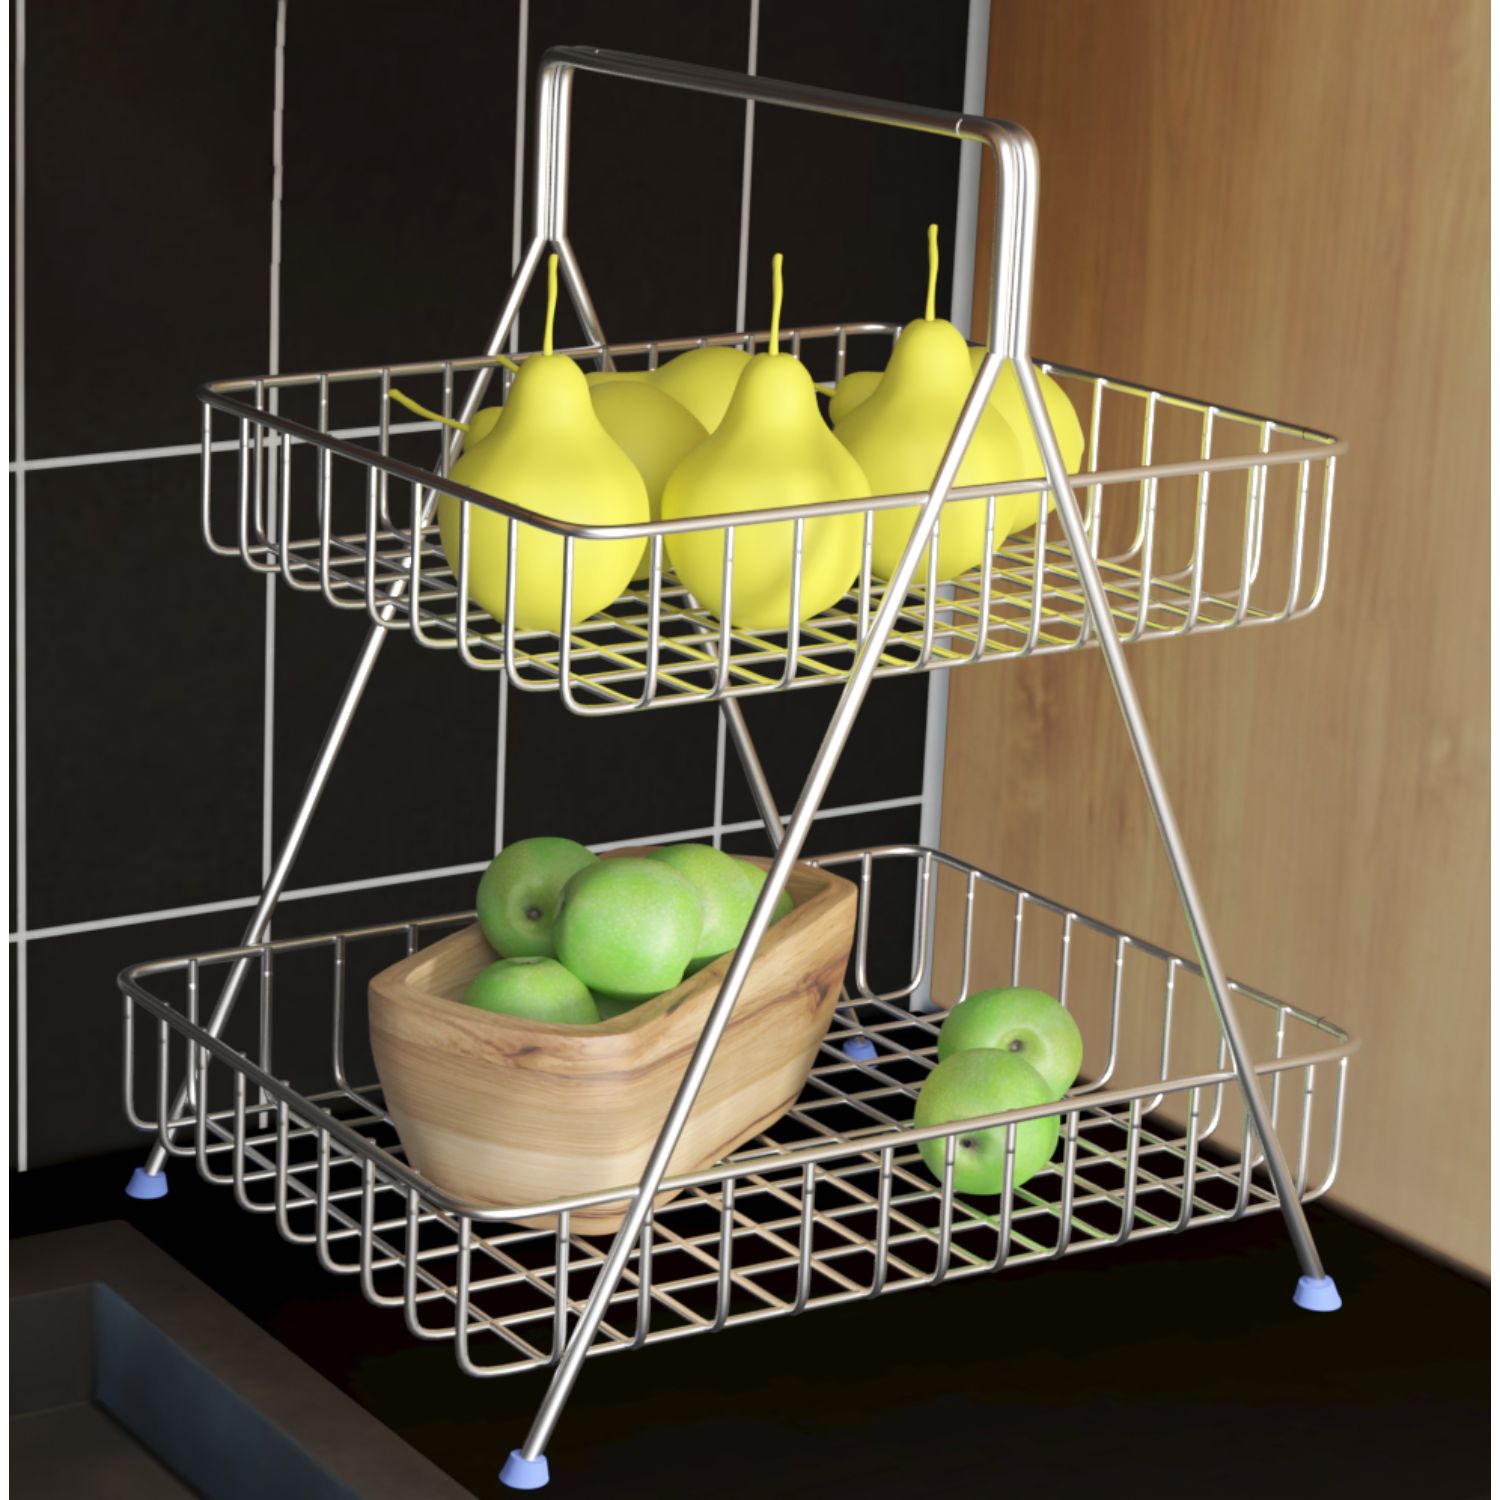 2 Tier Stainless Steel Fruit Basket Stand with Net Cover (Silver)